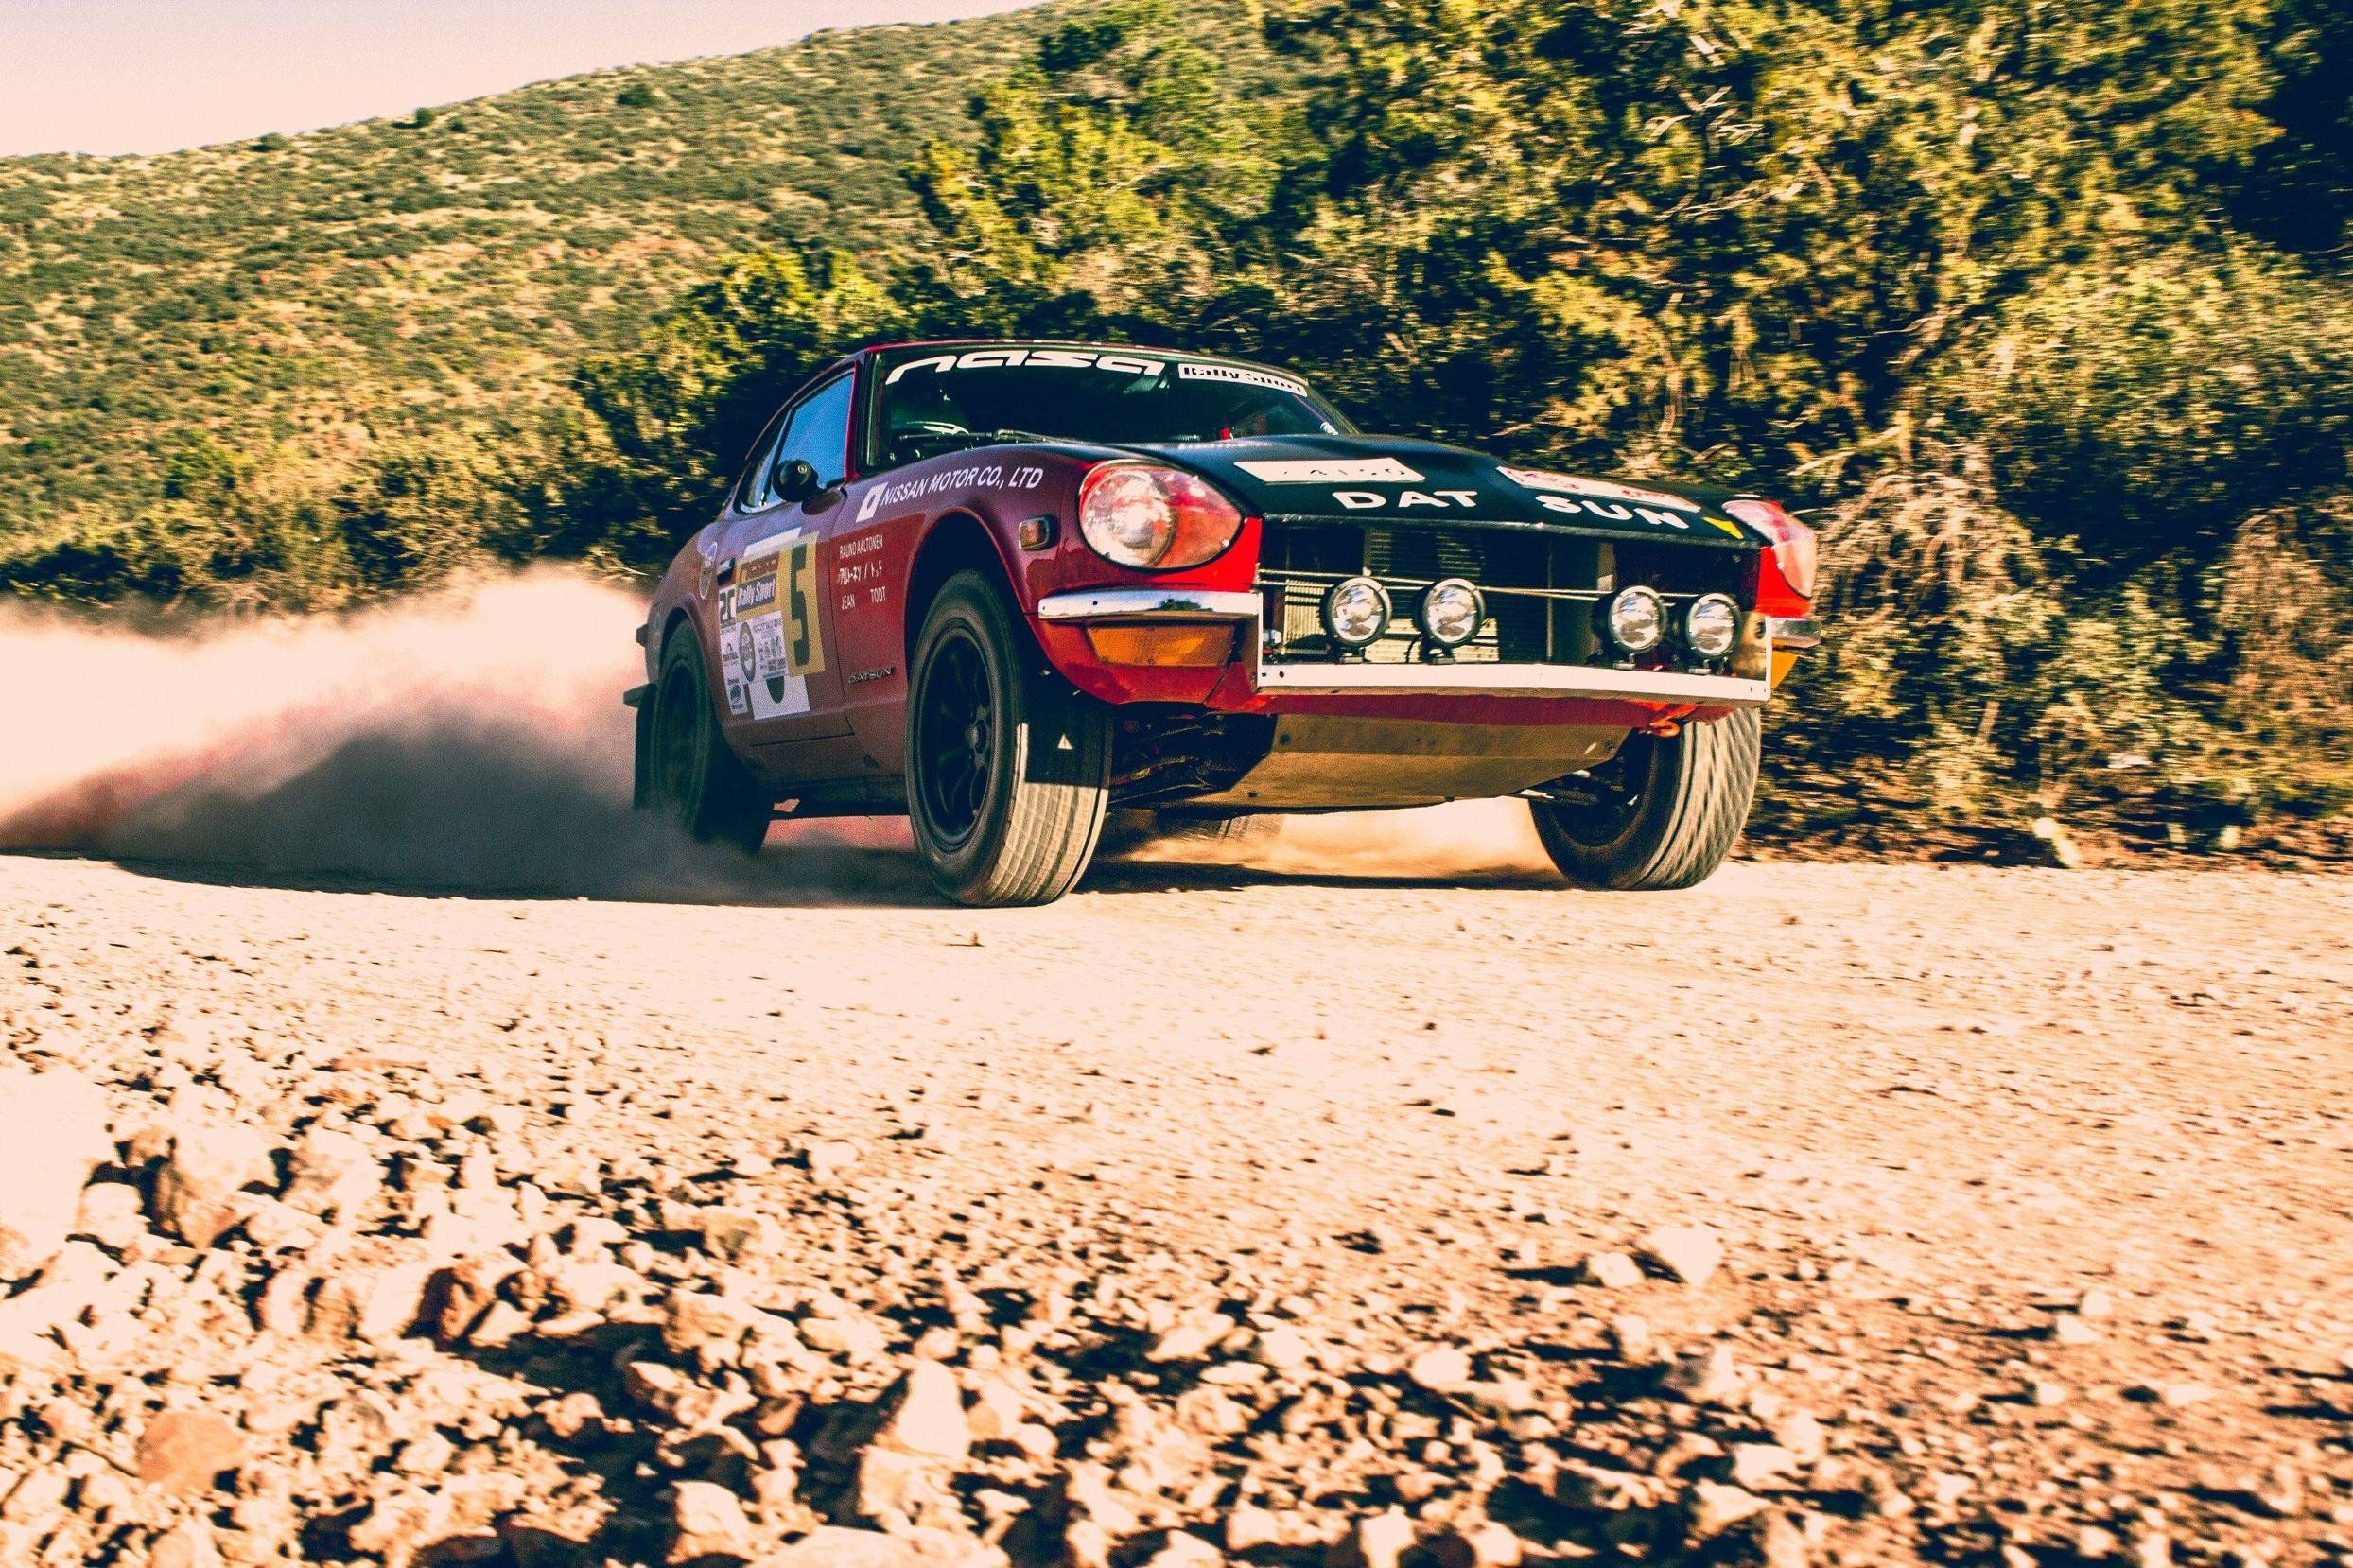 Rally 4K wallpaper for your desktop or mobile screen free and easy to download